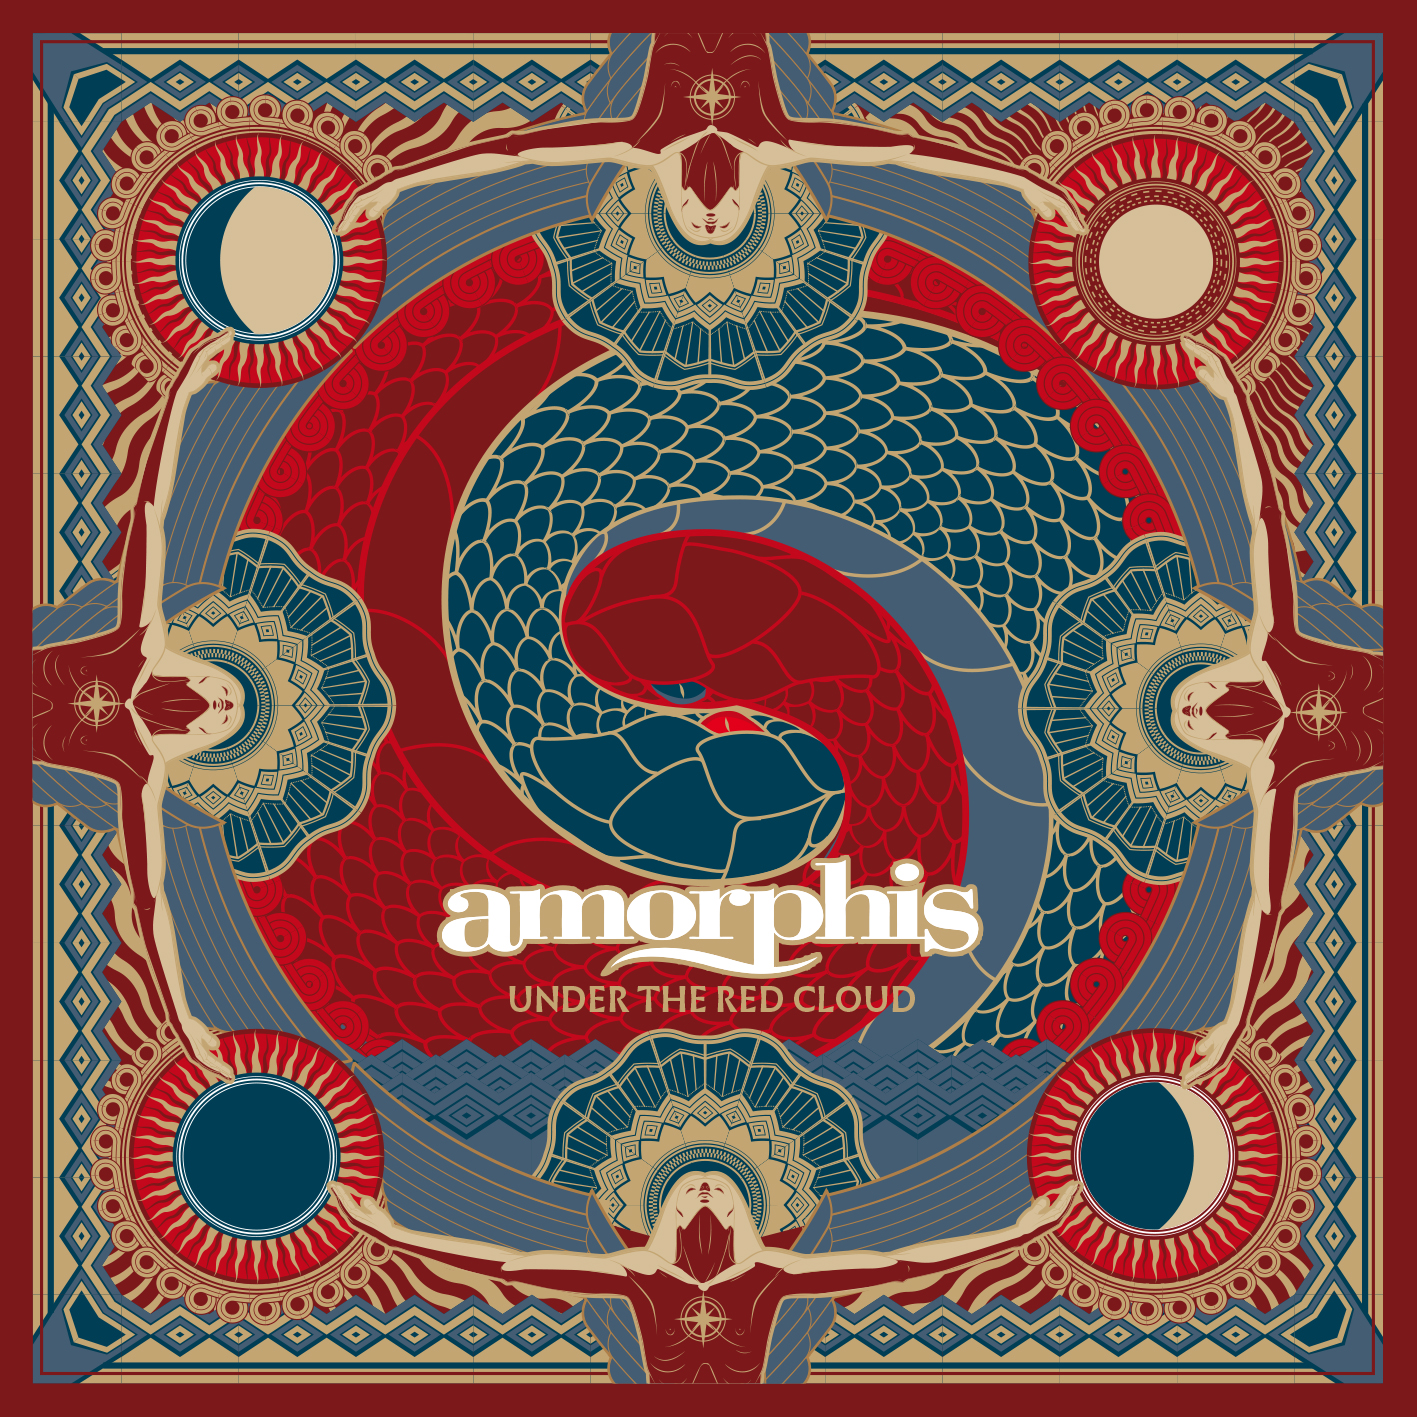 Amorphis – Under the Red Cloud Review